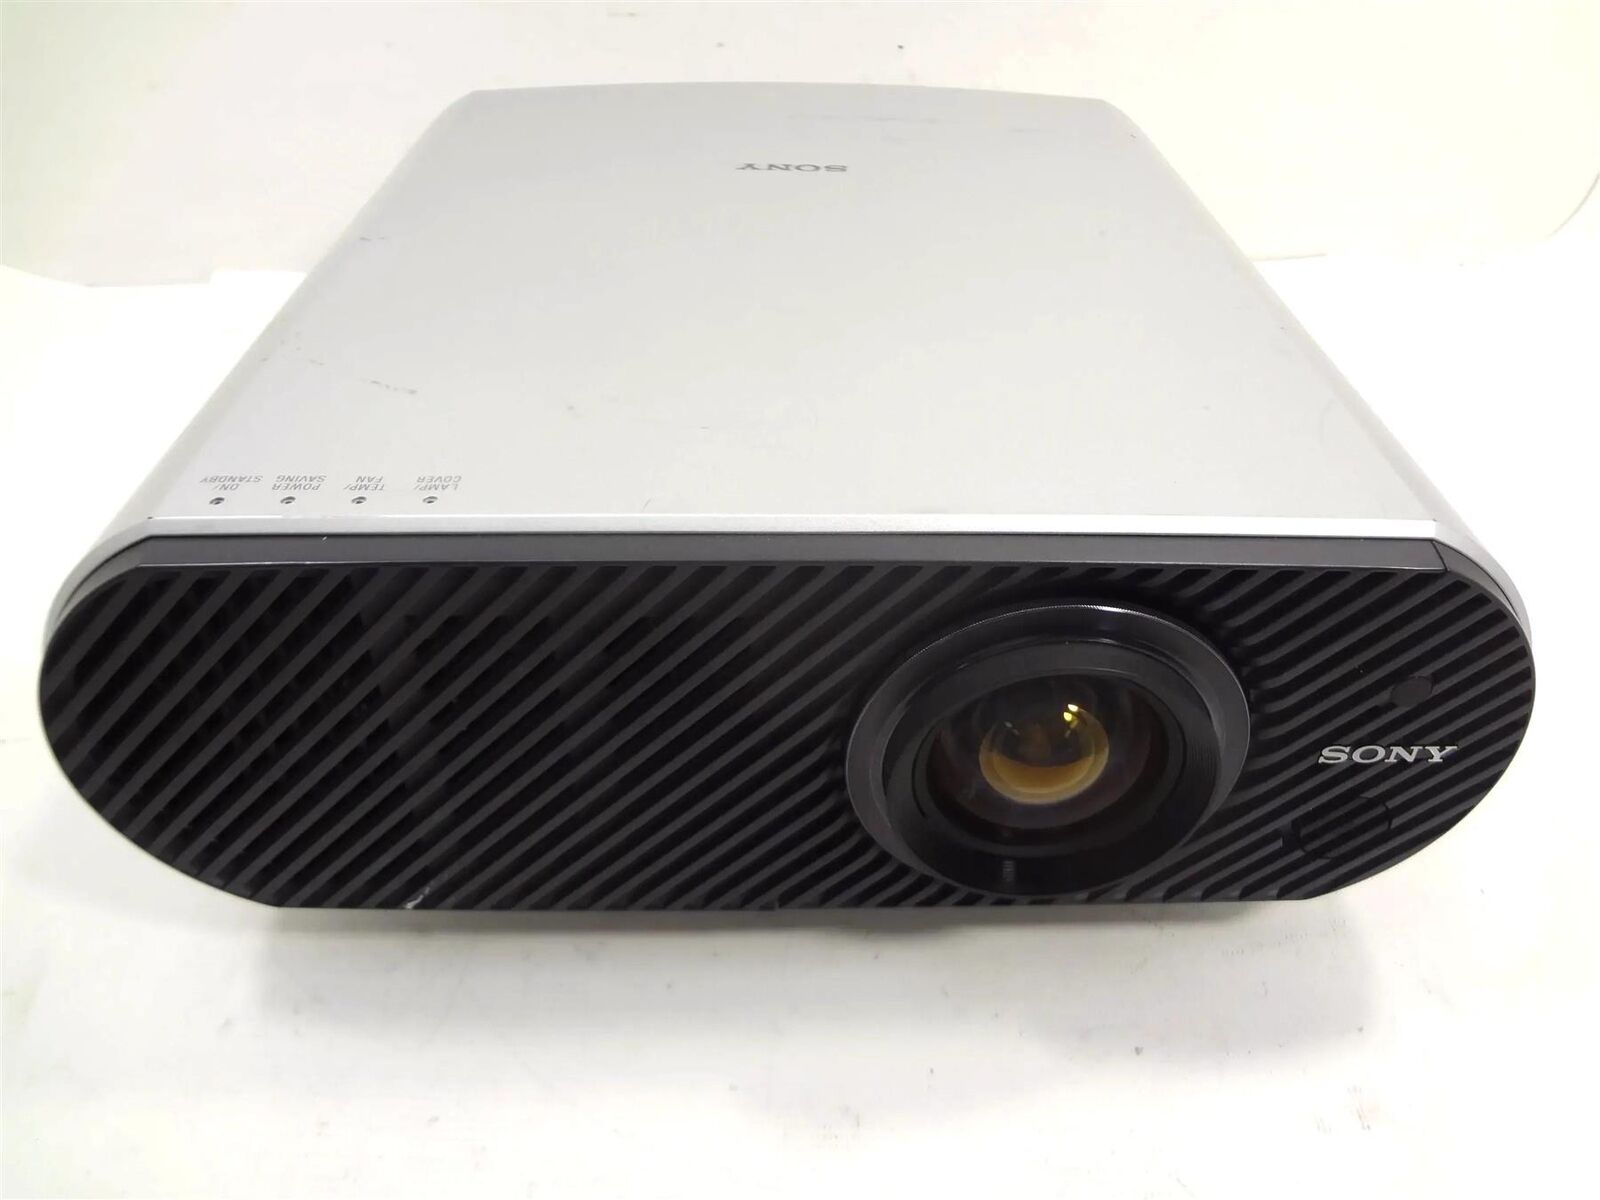 Sony VPL-HS51 720P Home Theater Projector 1,200 Lumens (ANSI)